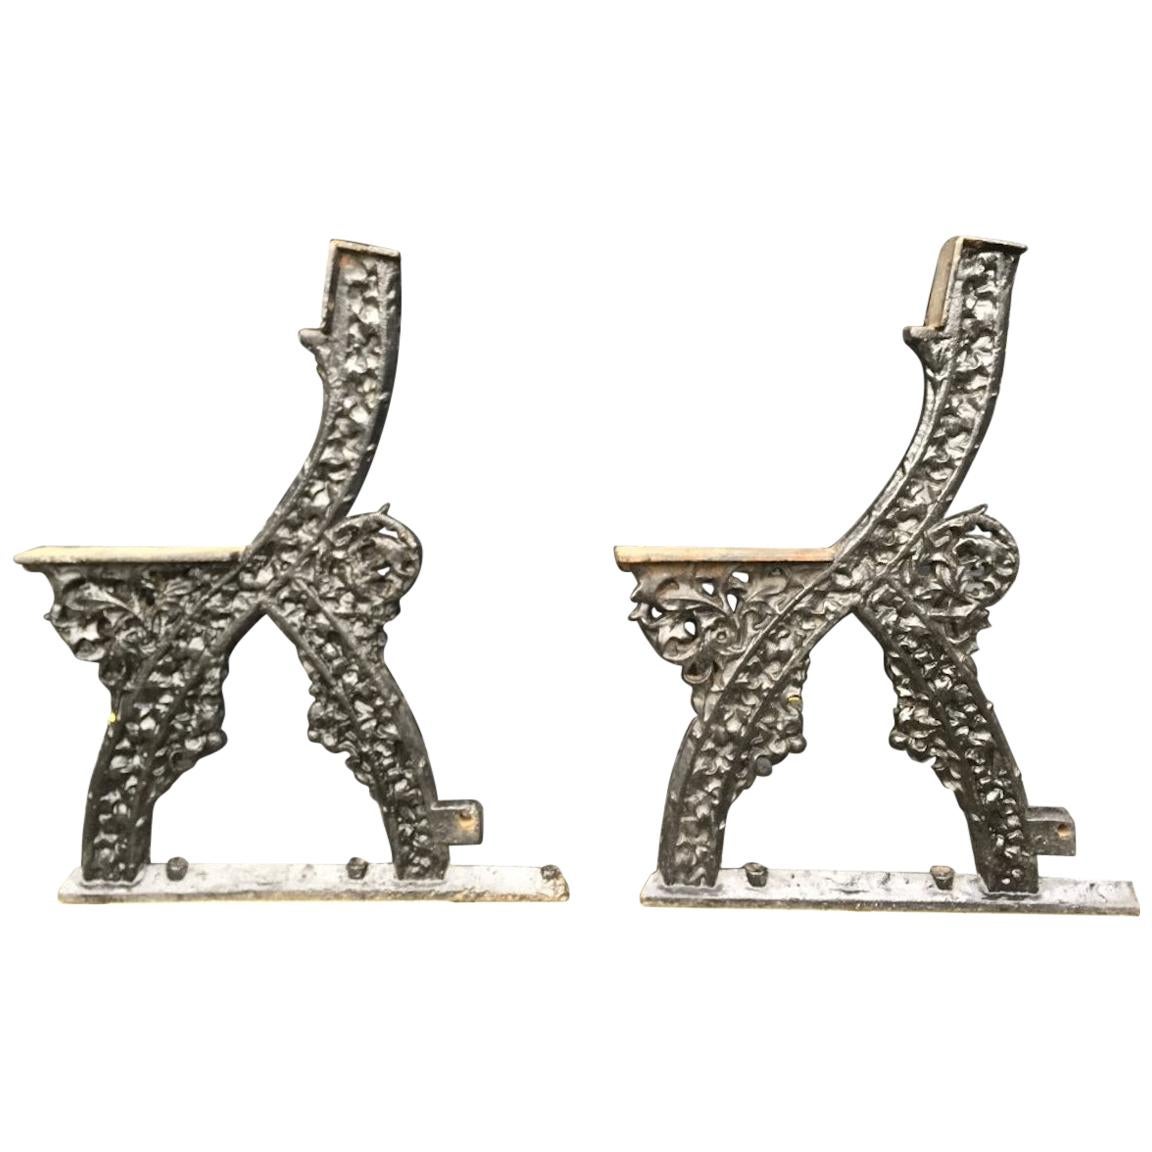 A.W.N. Pugin Attri, a Pair of Early Gothic Revival Cast Iron Garden Bench Ends